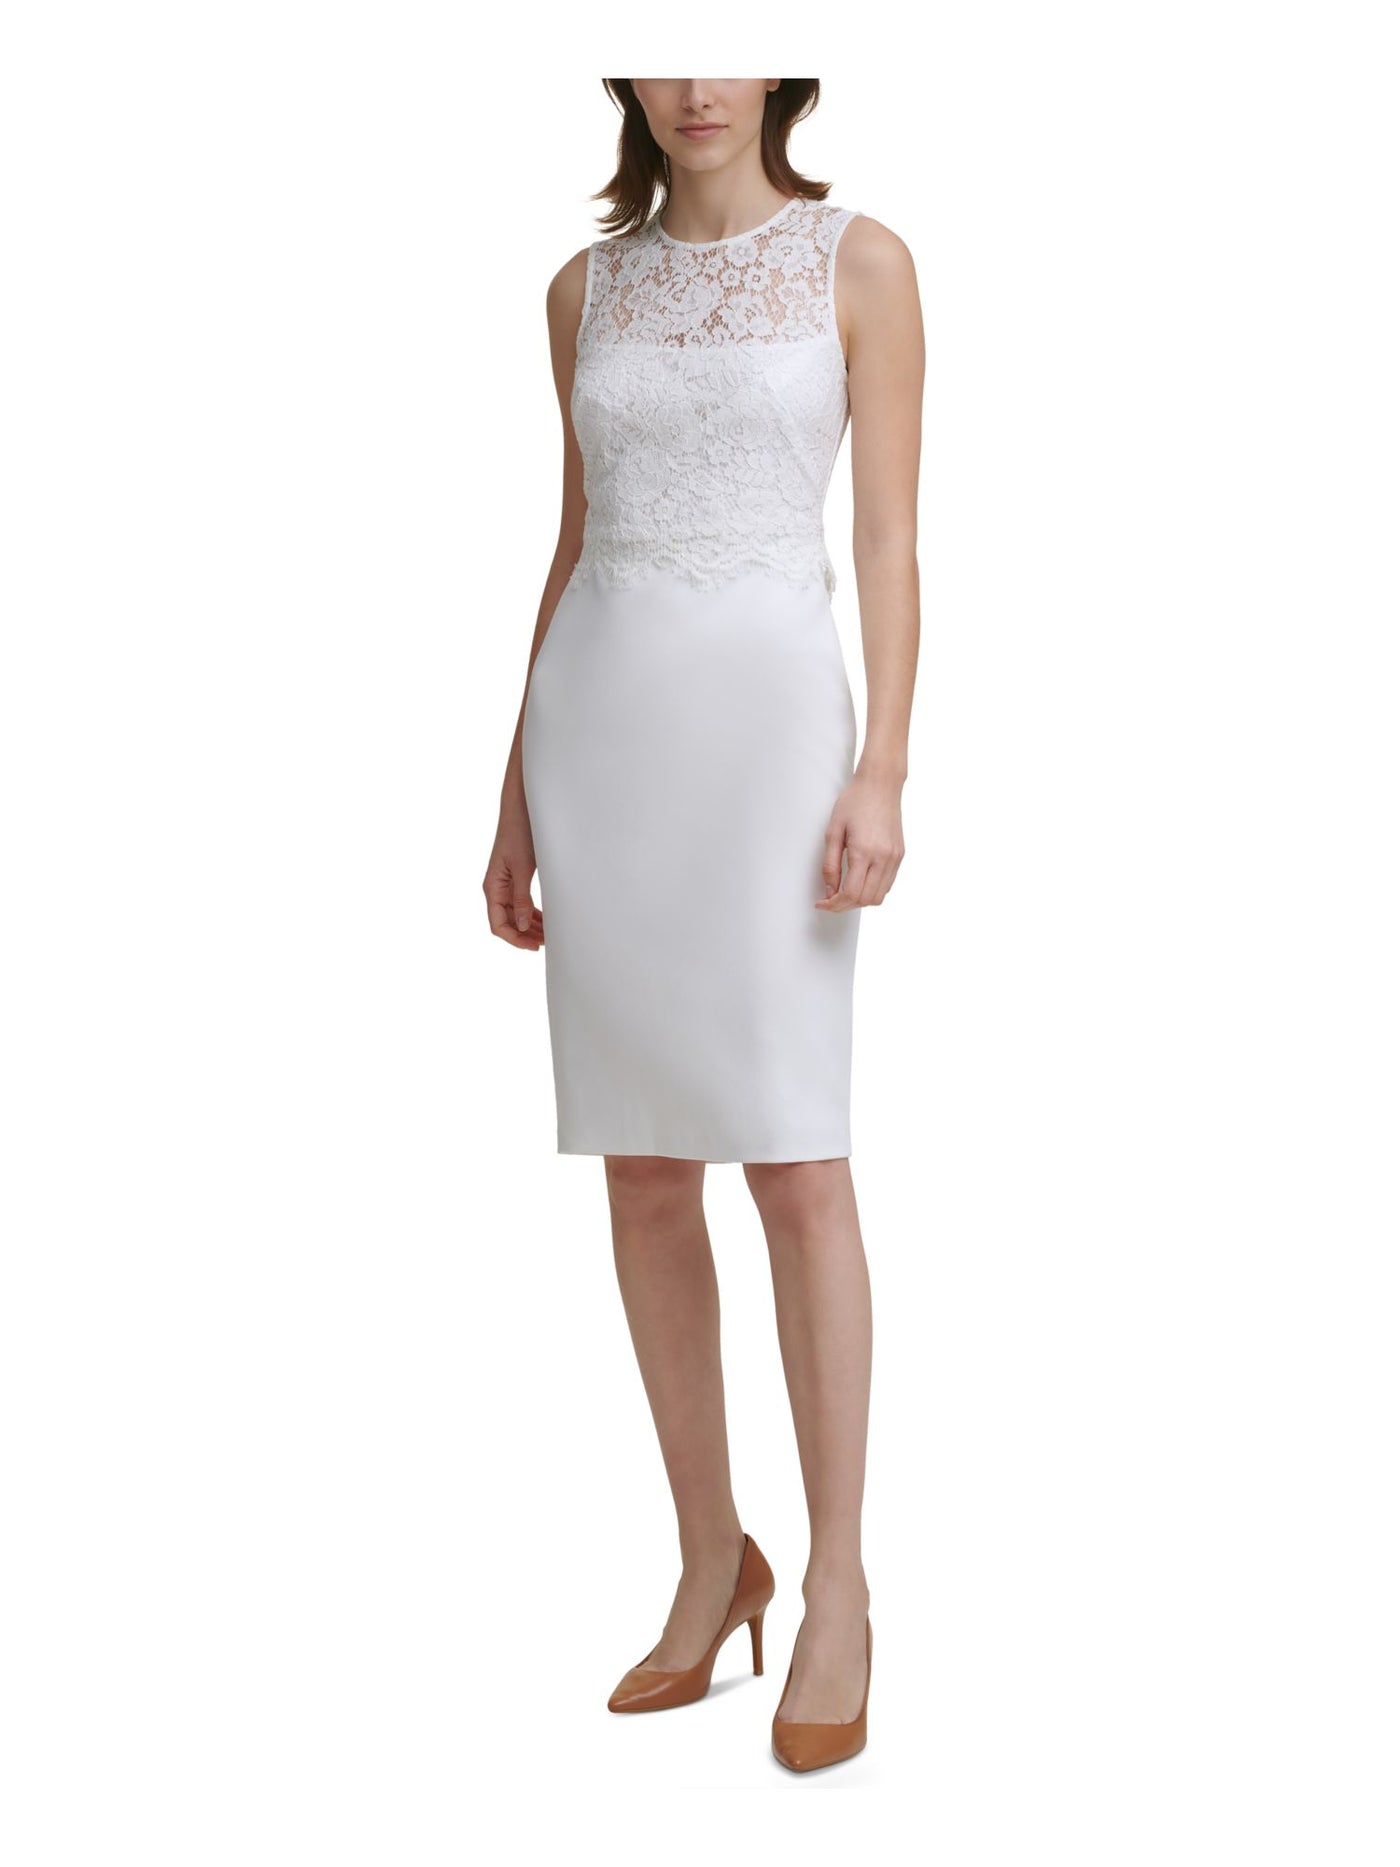 CALVIN KLEIN Womens Ivory Stretch Sheer Crew Neck Above The Knee Cocktail Sheath Dress Petites 2P